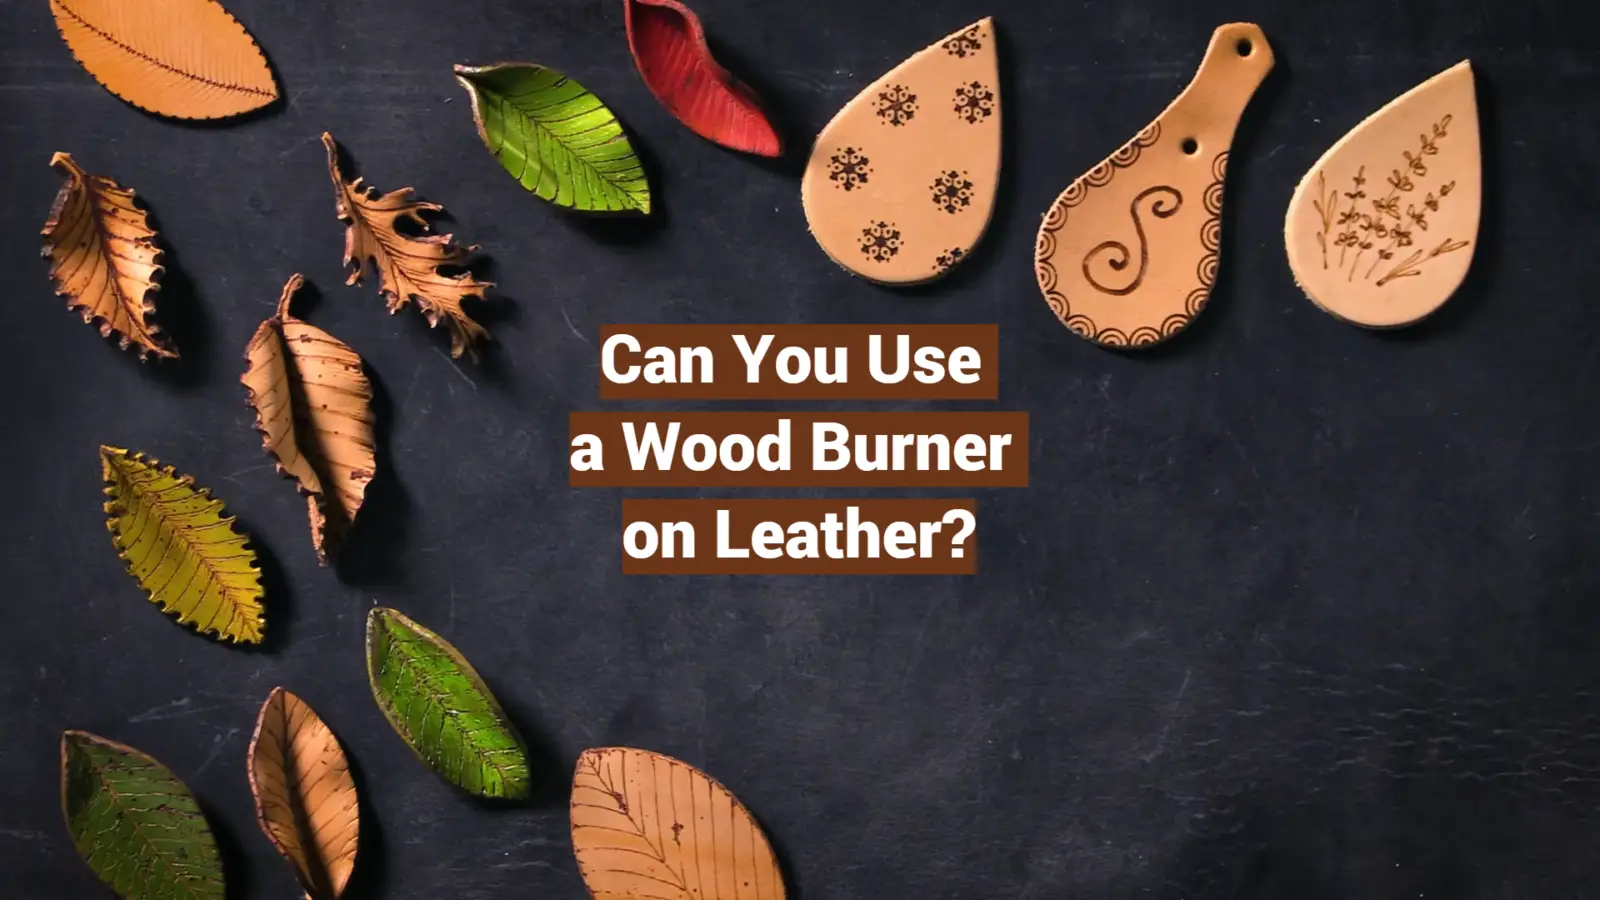 Can You Use a Wood Burner on Leather?